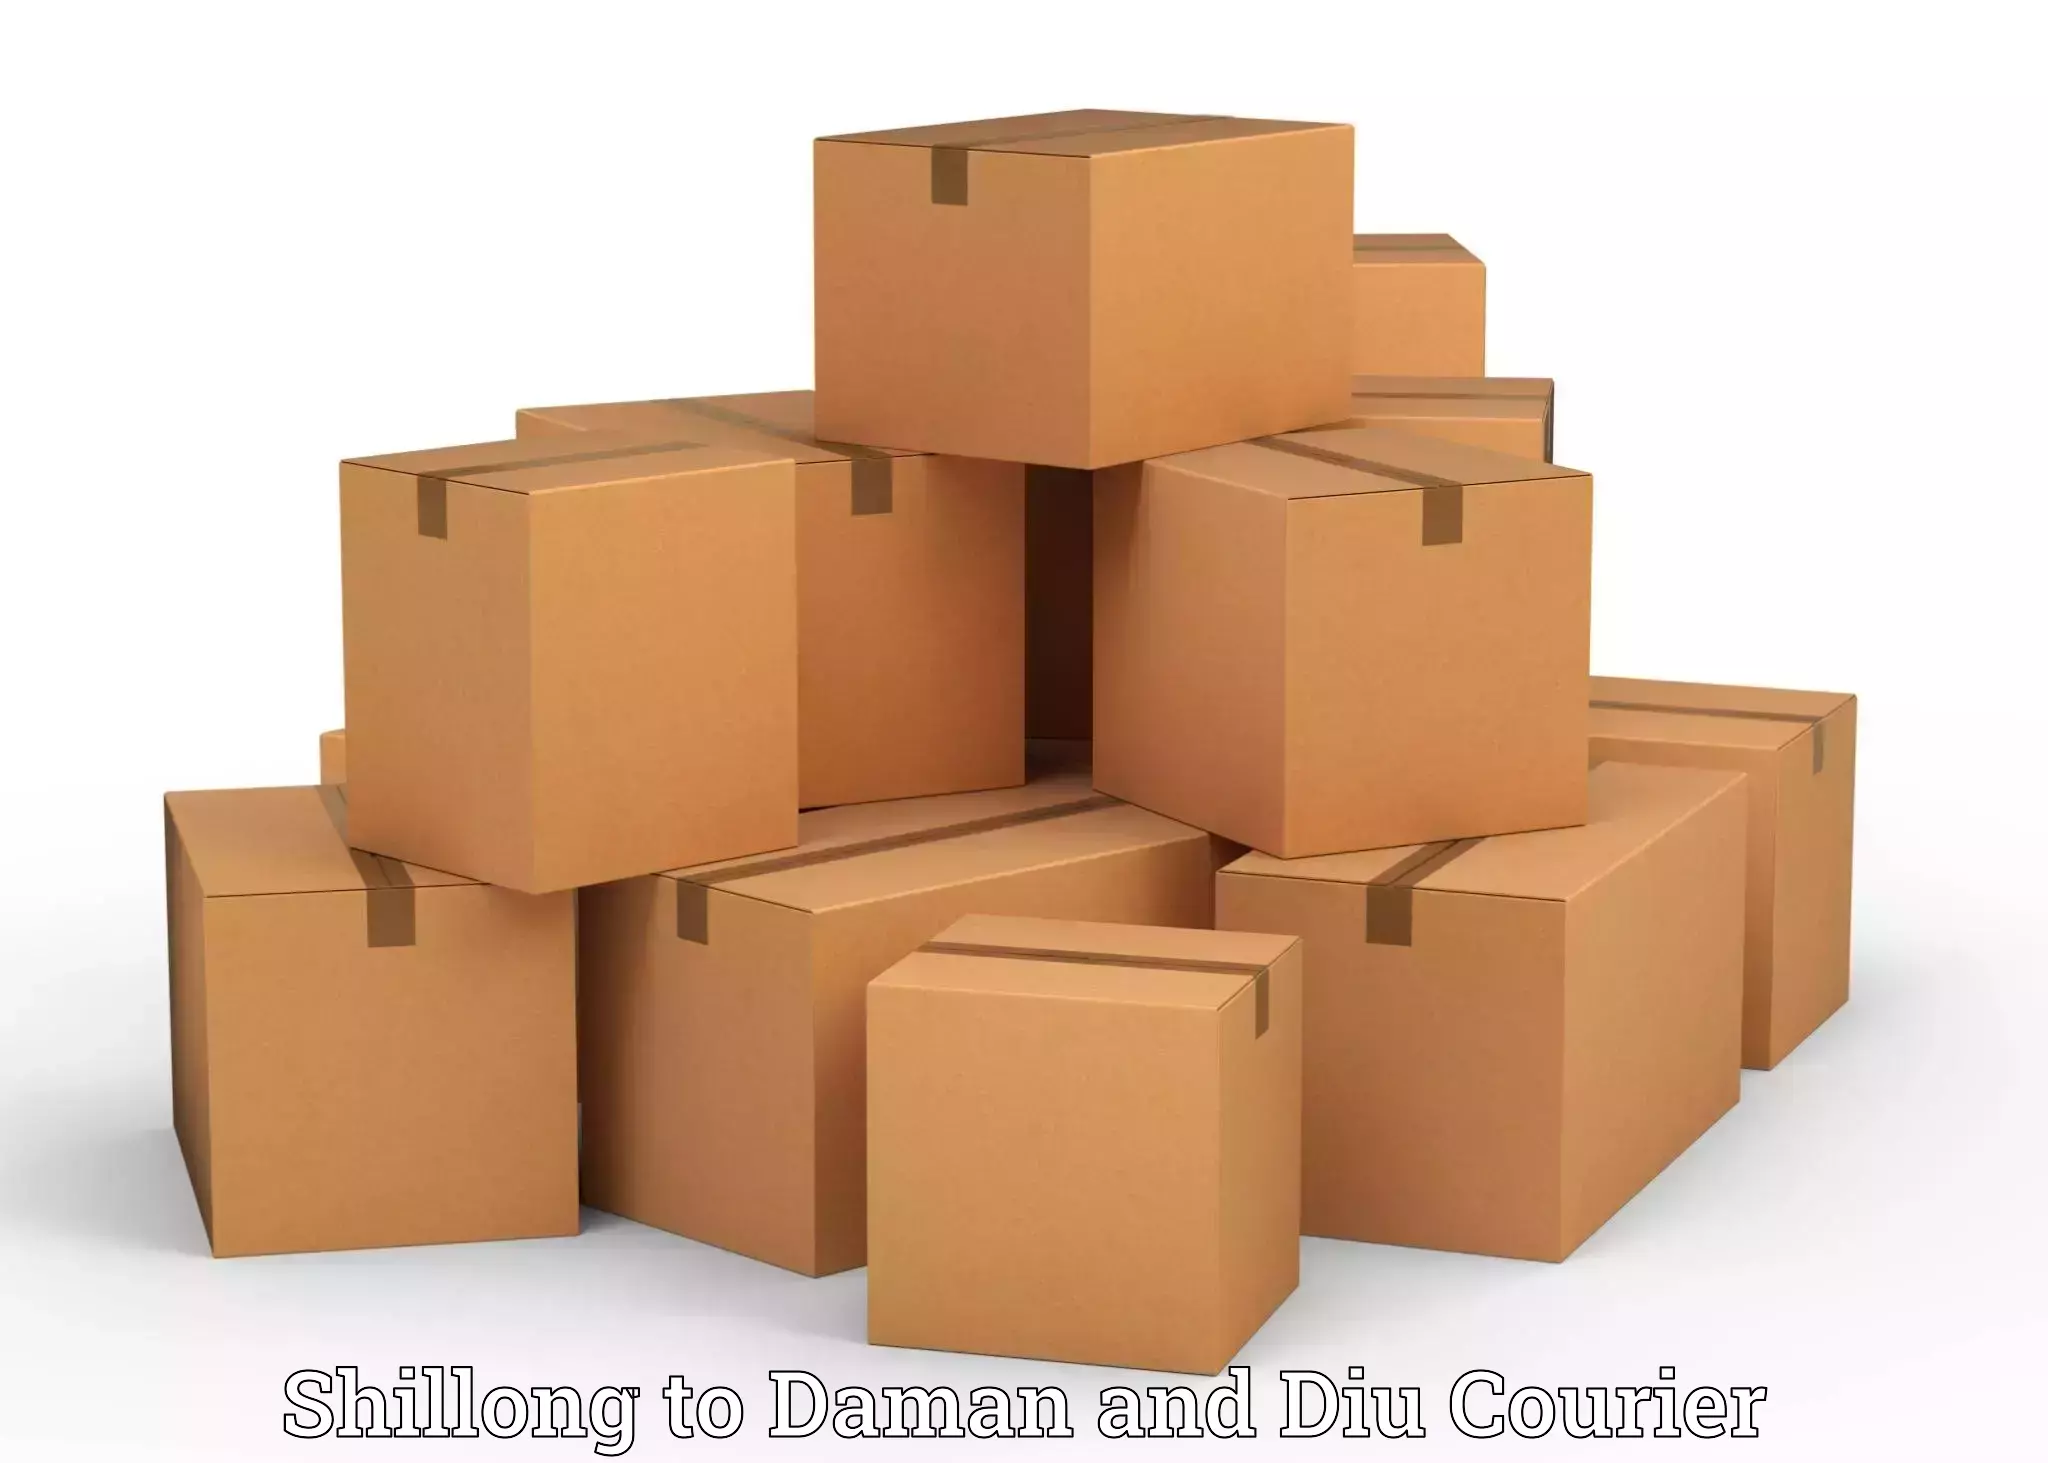 Professional furniture movers Shillong to Daman